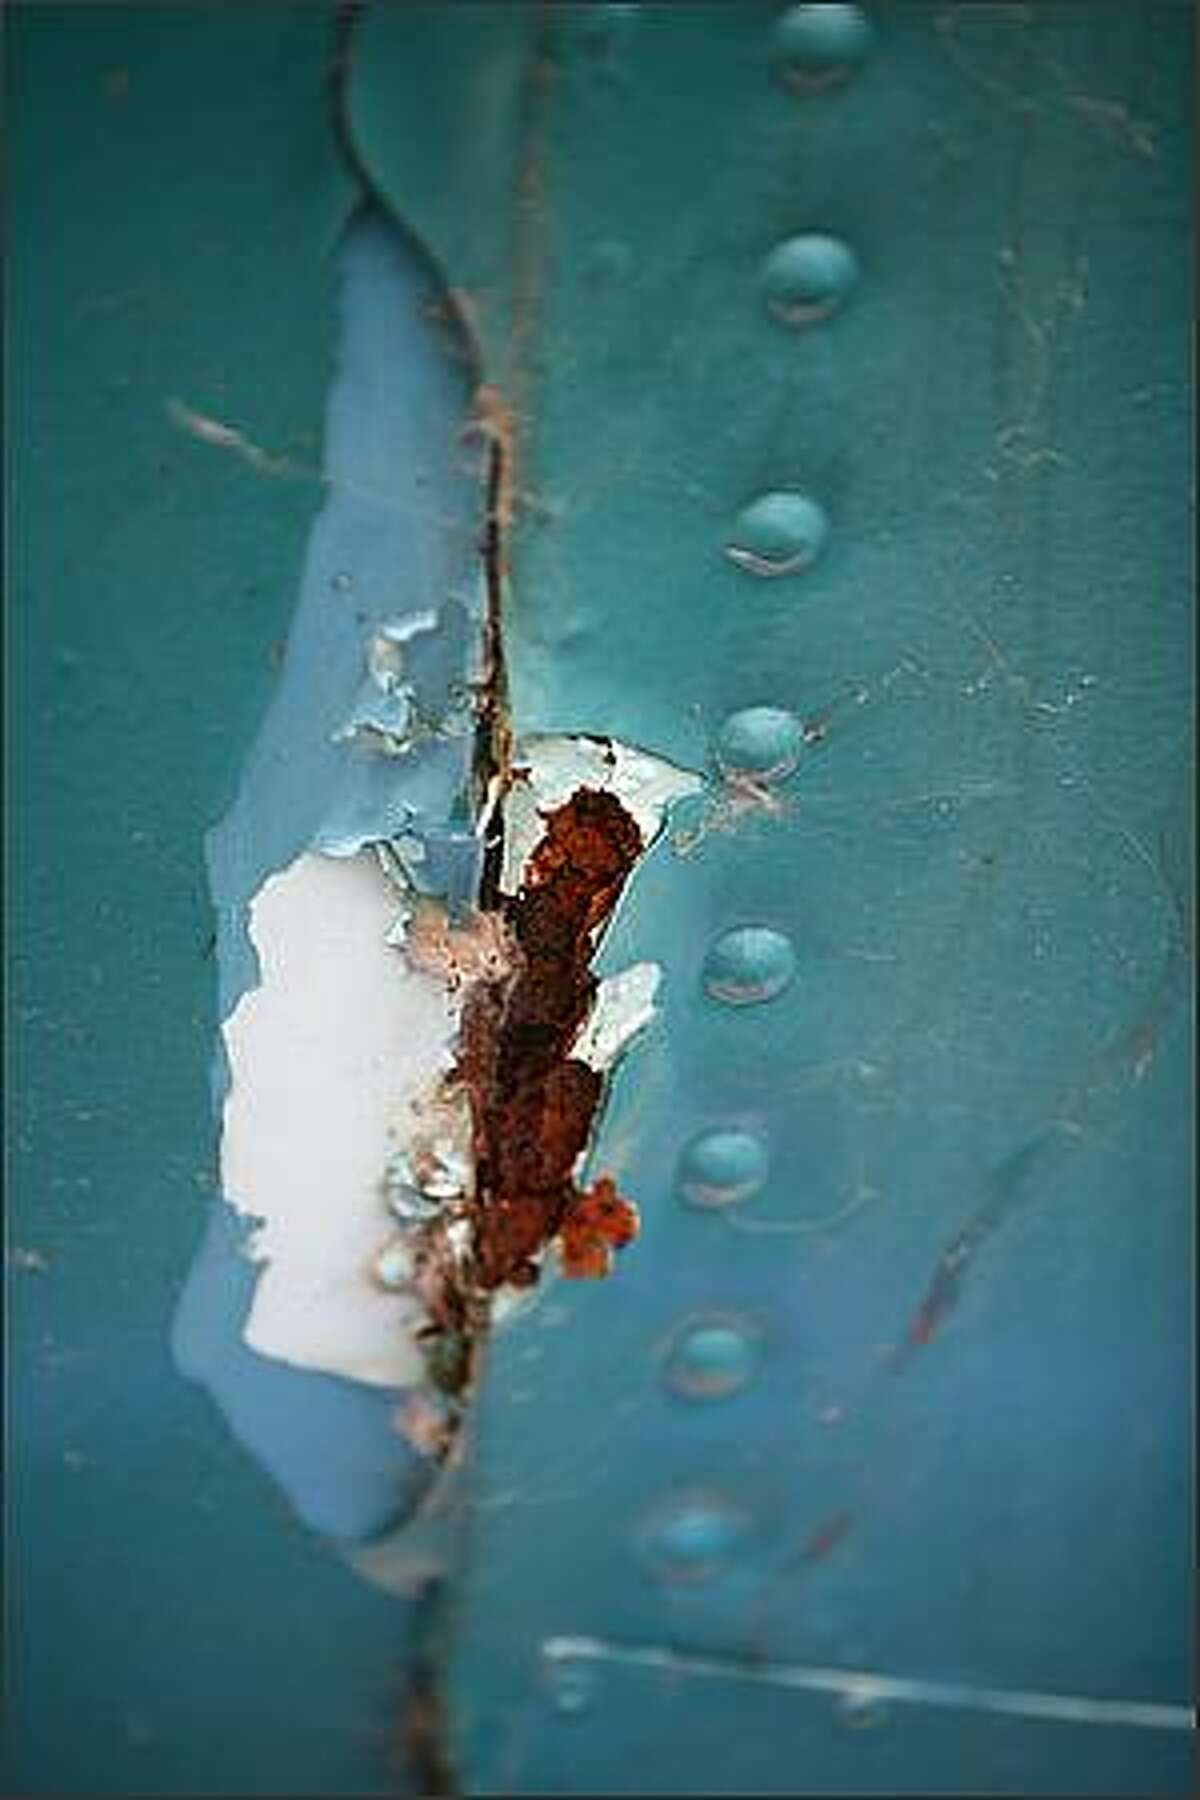 Rust can be seen on the Seattle P-I's signature globe atop the Seattle P-I's waterfront building in Seattle. Andy Colton, who helps maintain the globe said that structurally the globe is sound. However, its skin is rusting and he said working on the globe is like "putting a screw into a saltine cracker."